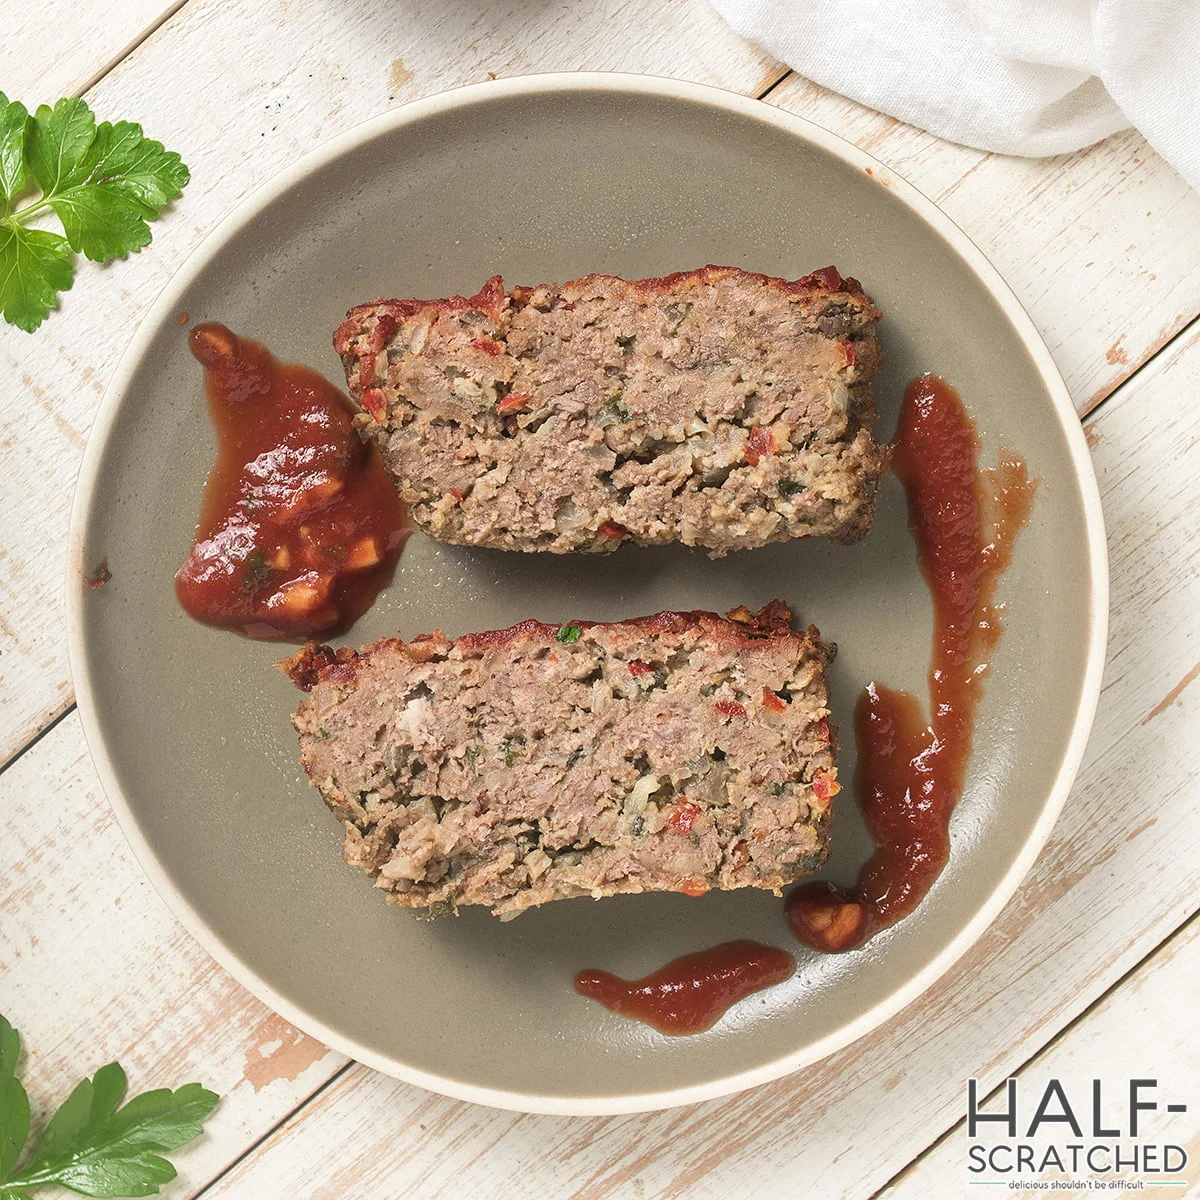 Two portions of meatloaf served on a plate